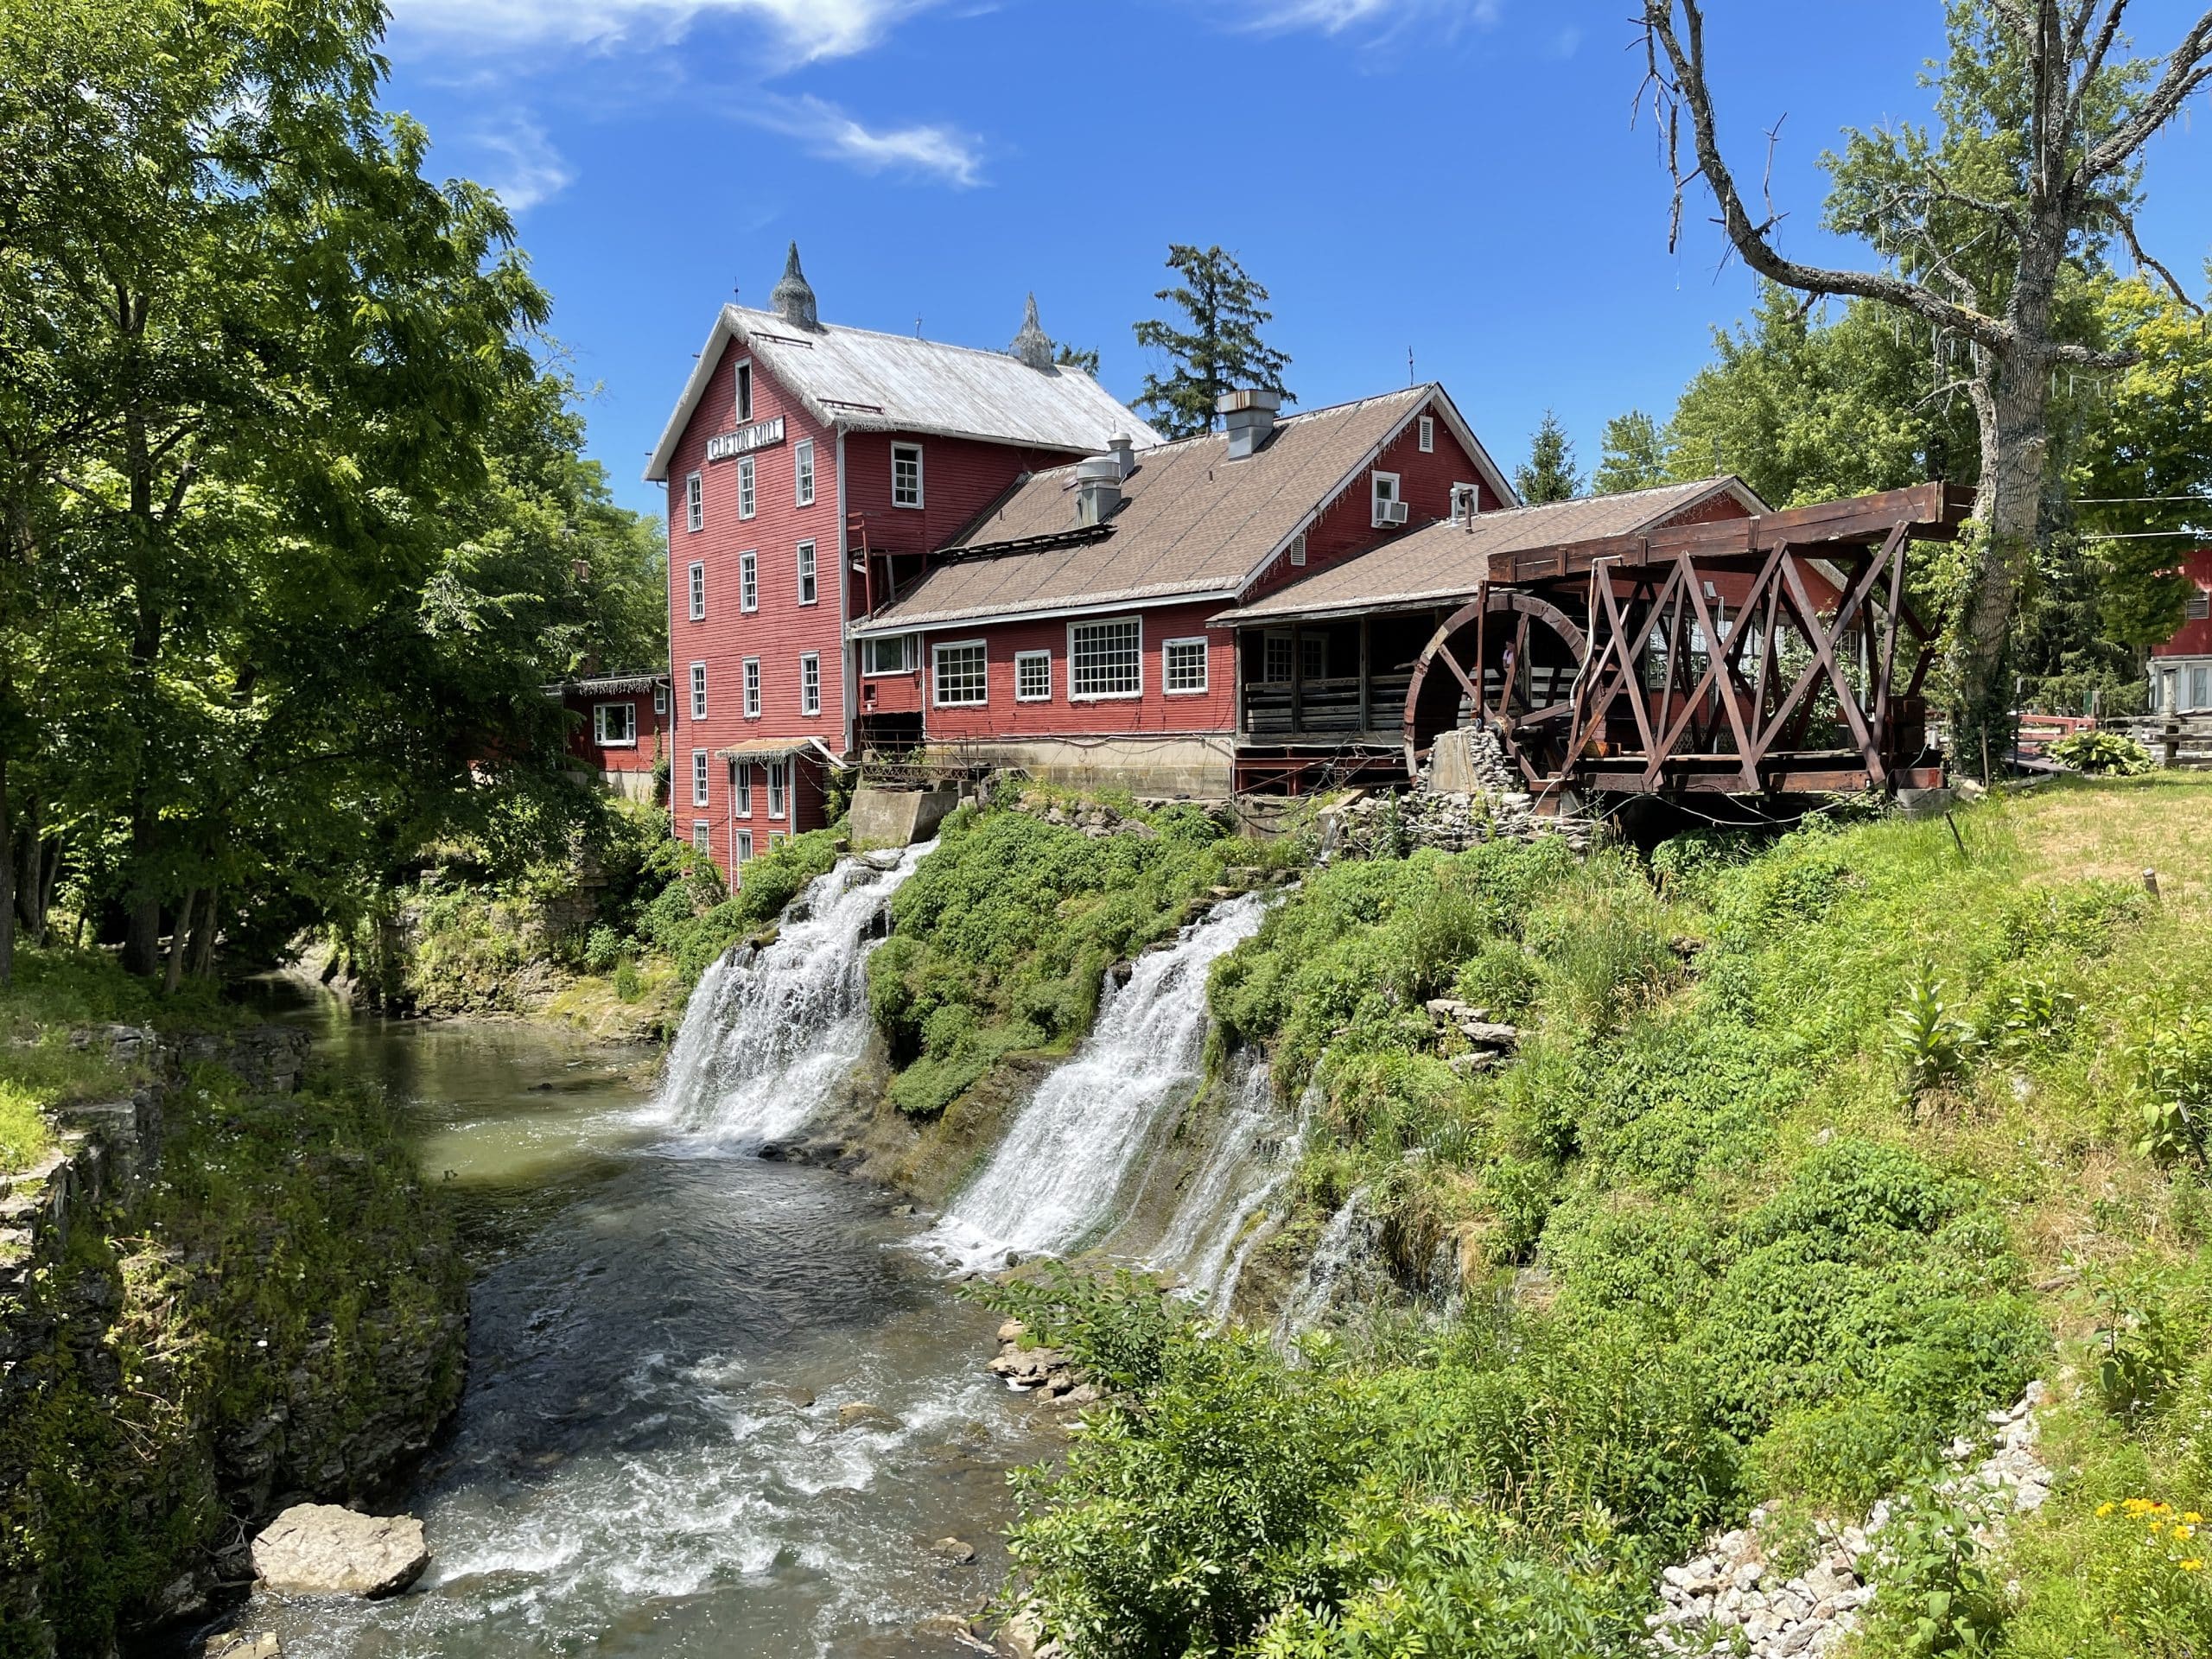 red mill named clifton mill with two waterfalls down into a river gorge